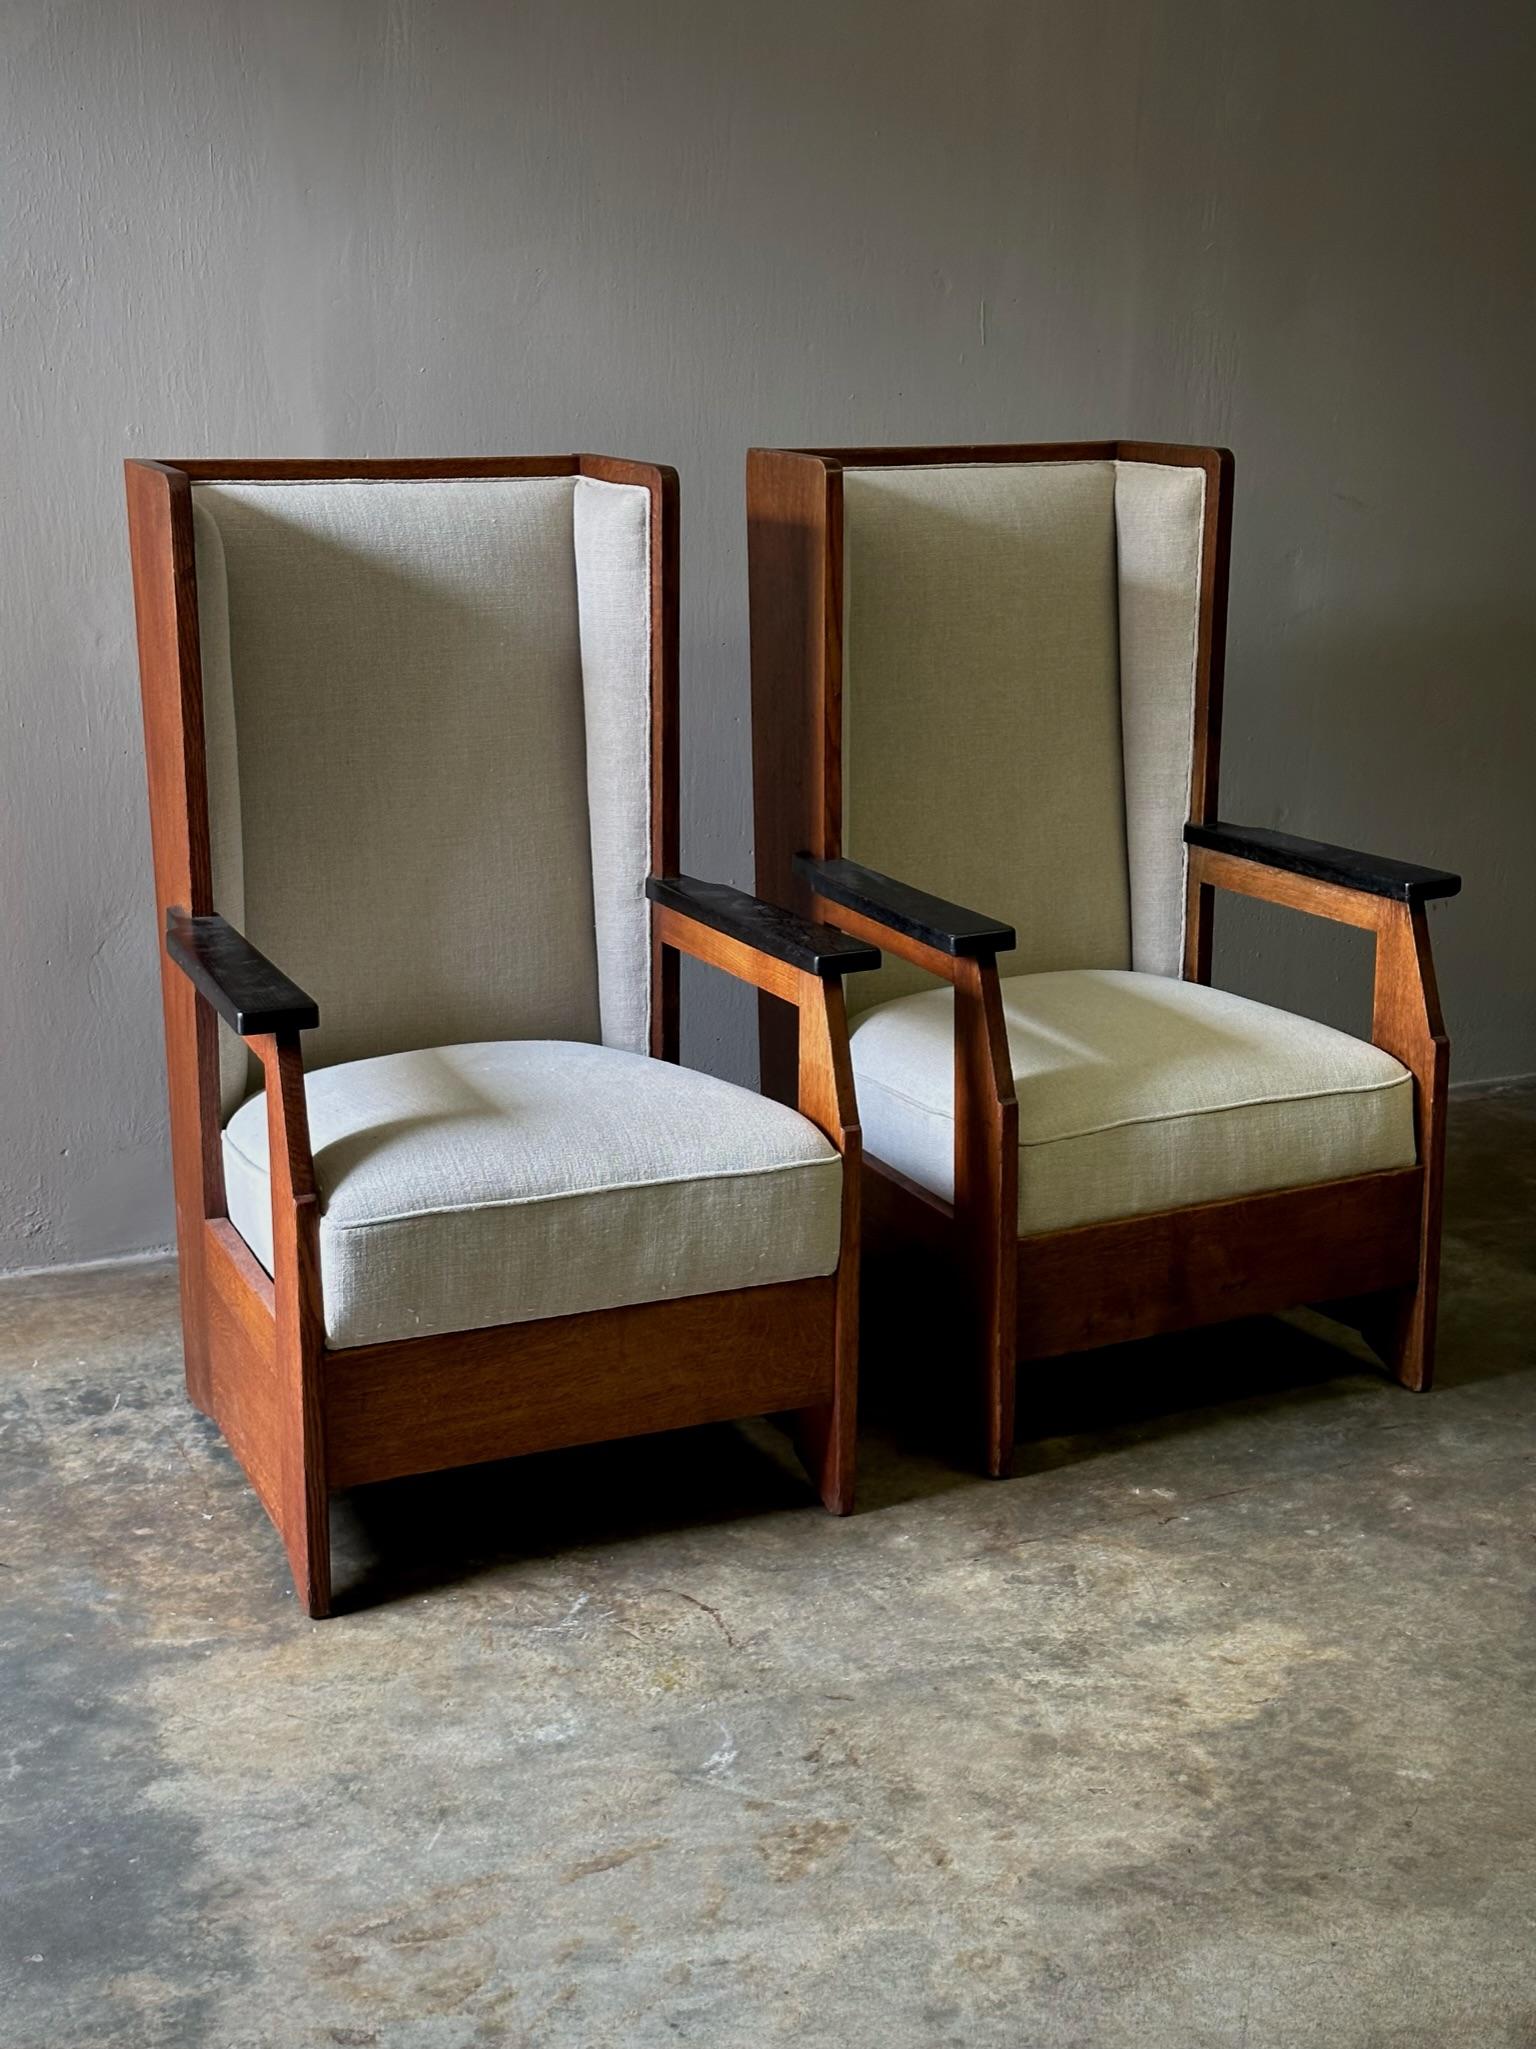 Unique set of two 1920s Haagse School high back armchairs with white linen upholstery, designed by influential architect Hendrik Wouda for the firm H. Pander & Zonen. Dramatic and inviting, the pair is defined by their straightforward, well-balanced